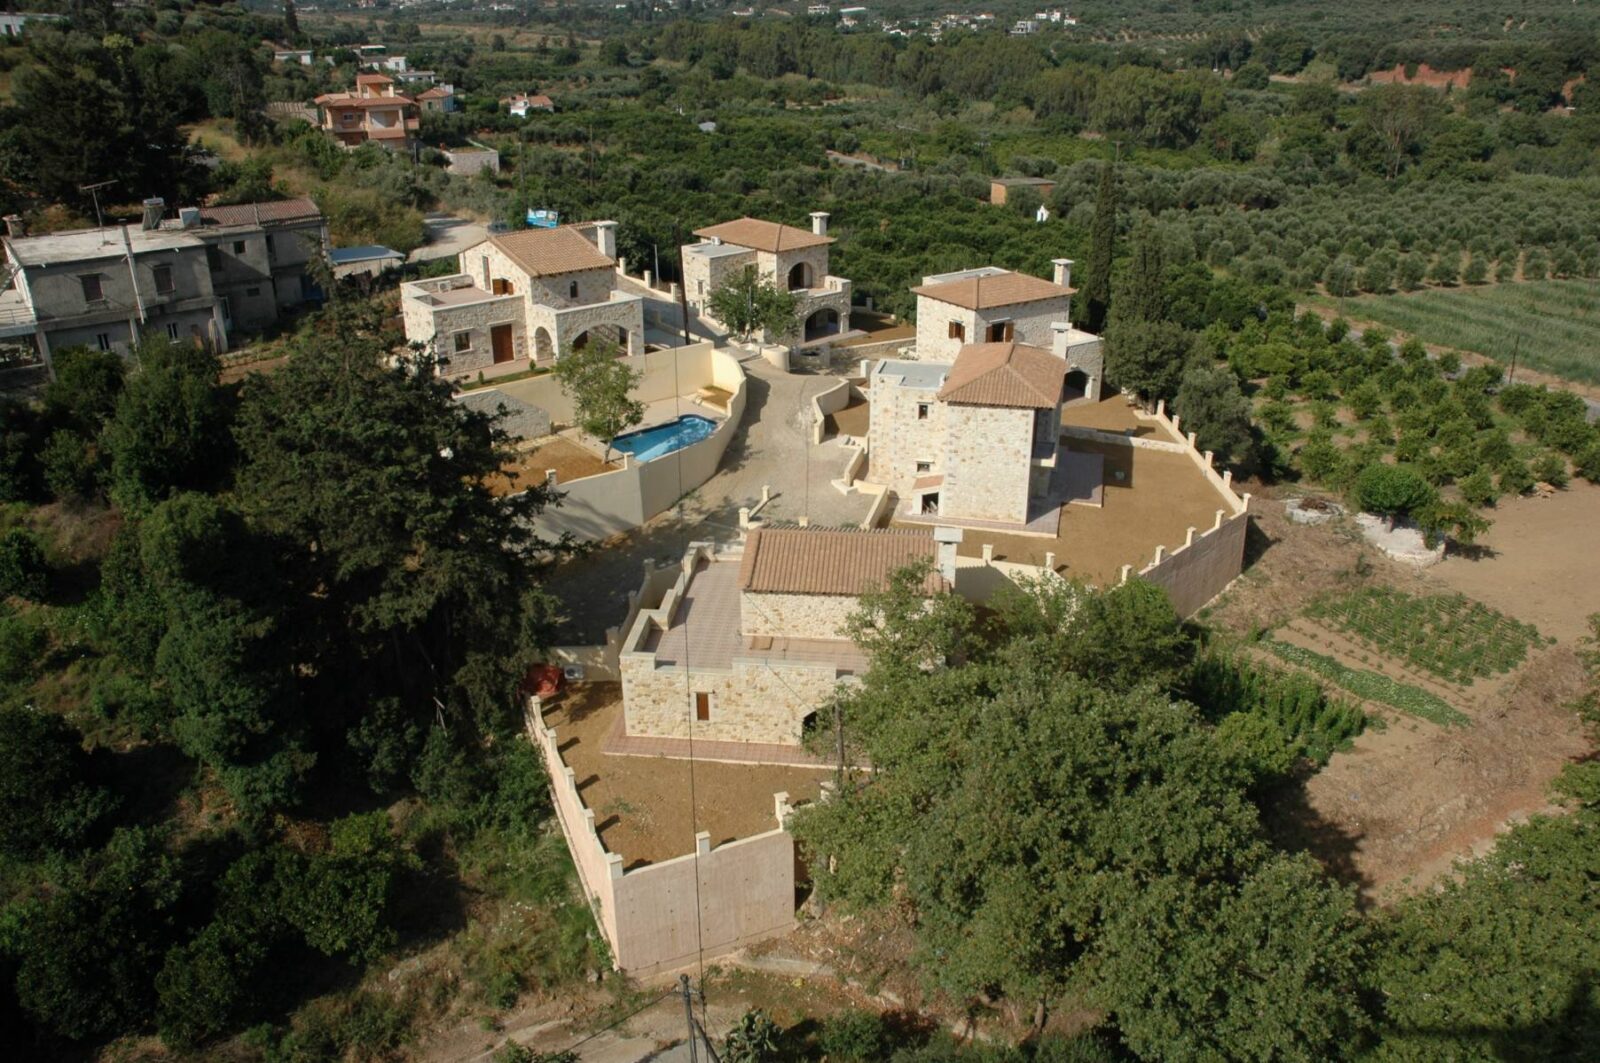 COMPLEX OF STONE-BUILT VILLAS FOR SALE IN CHANIA, GREECE